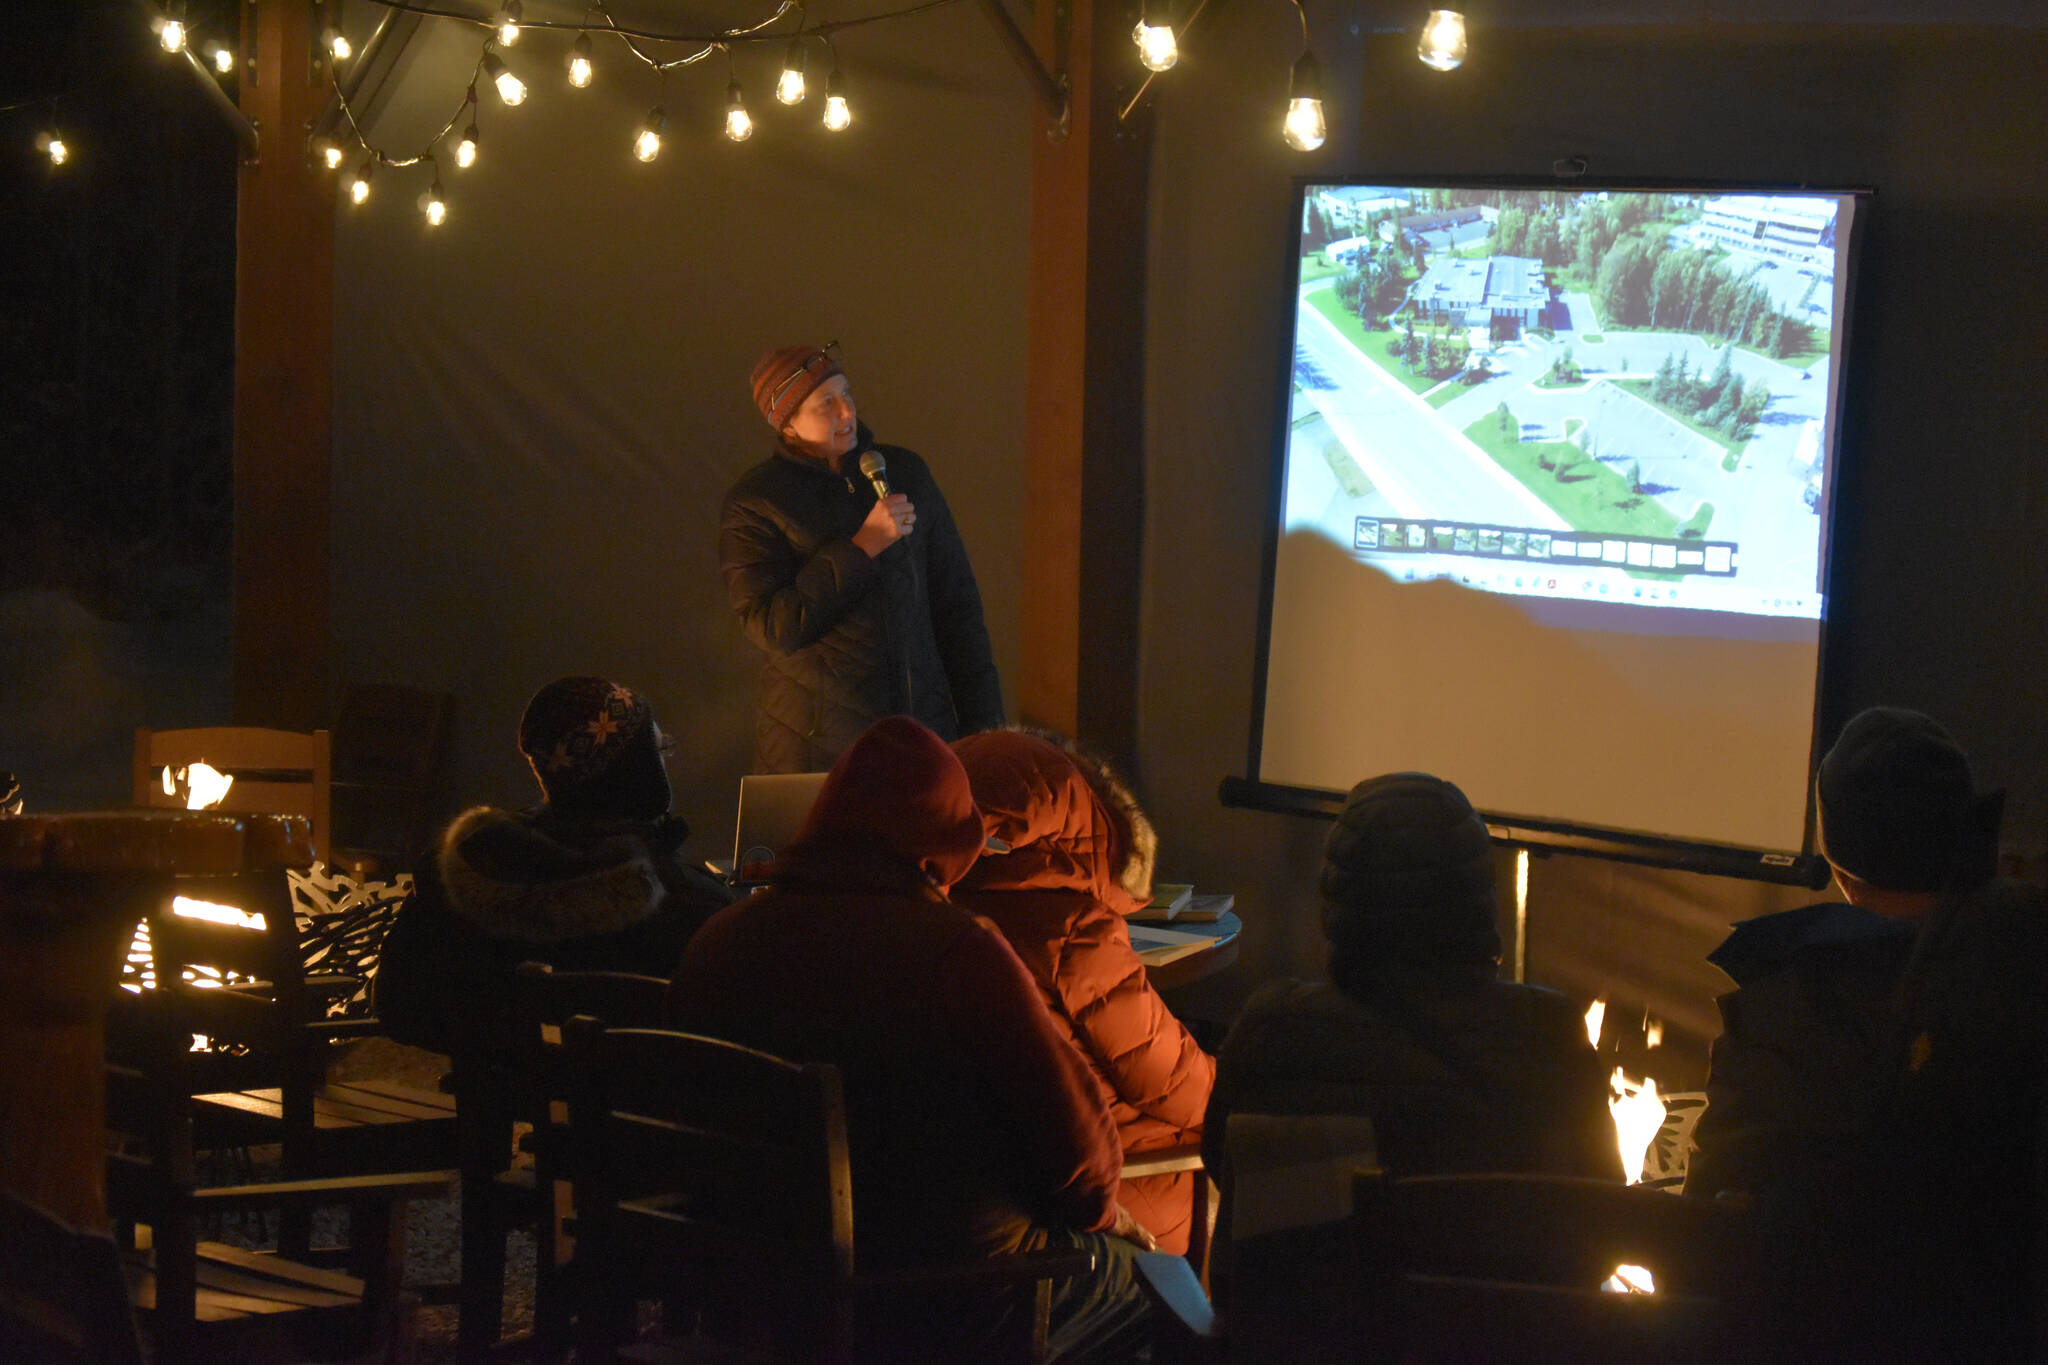 Architect Nancy Casey speaks in front of a small gathering at this year’s final Fireside Chat presented by the Kenai Watershed Forum on Nov. 30, 2022, at Kenai River Brewing in Soldotna, Alaska. (Jake Dye/Peninsula Clarion)